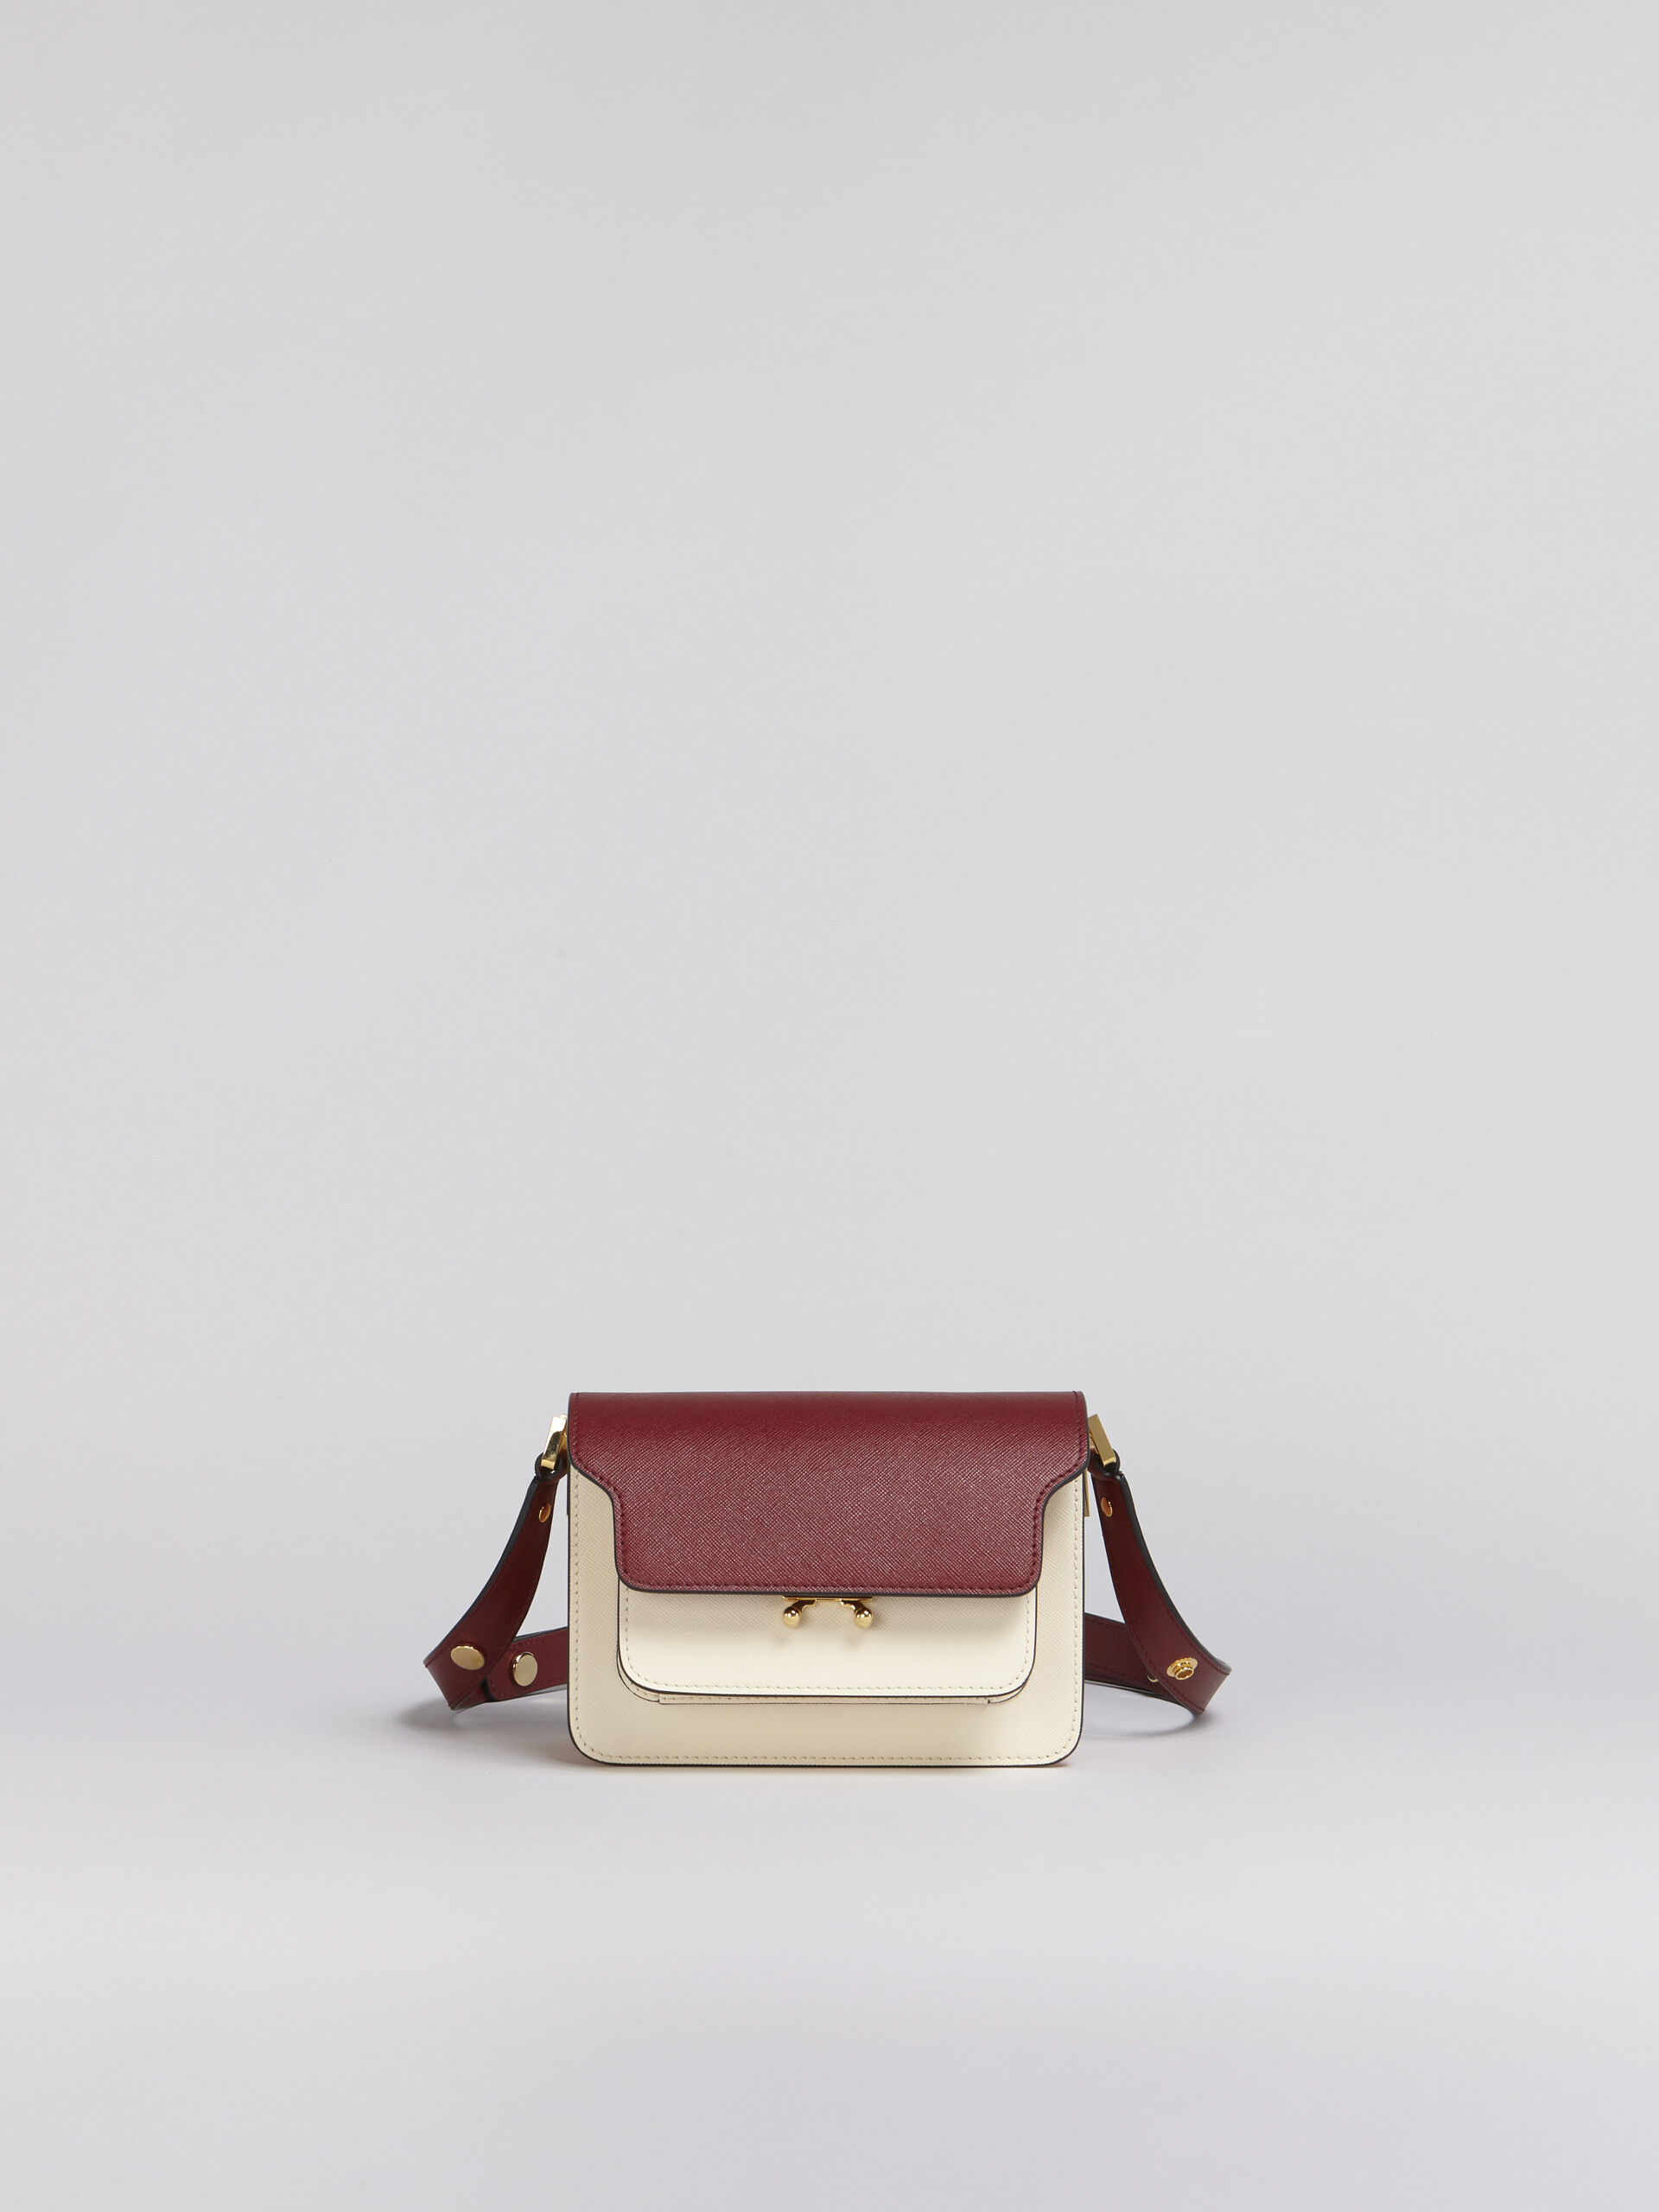 TRUNK mini bag in red white and pink saffiano leather - Shoulder Bags - Image 1